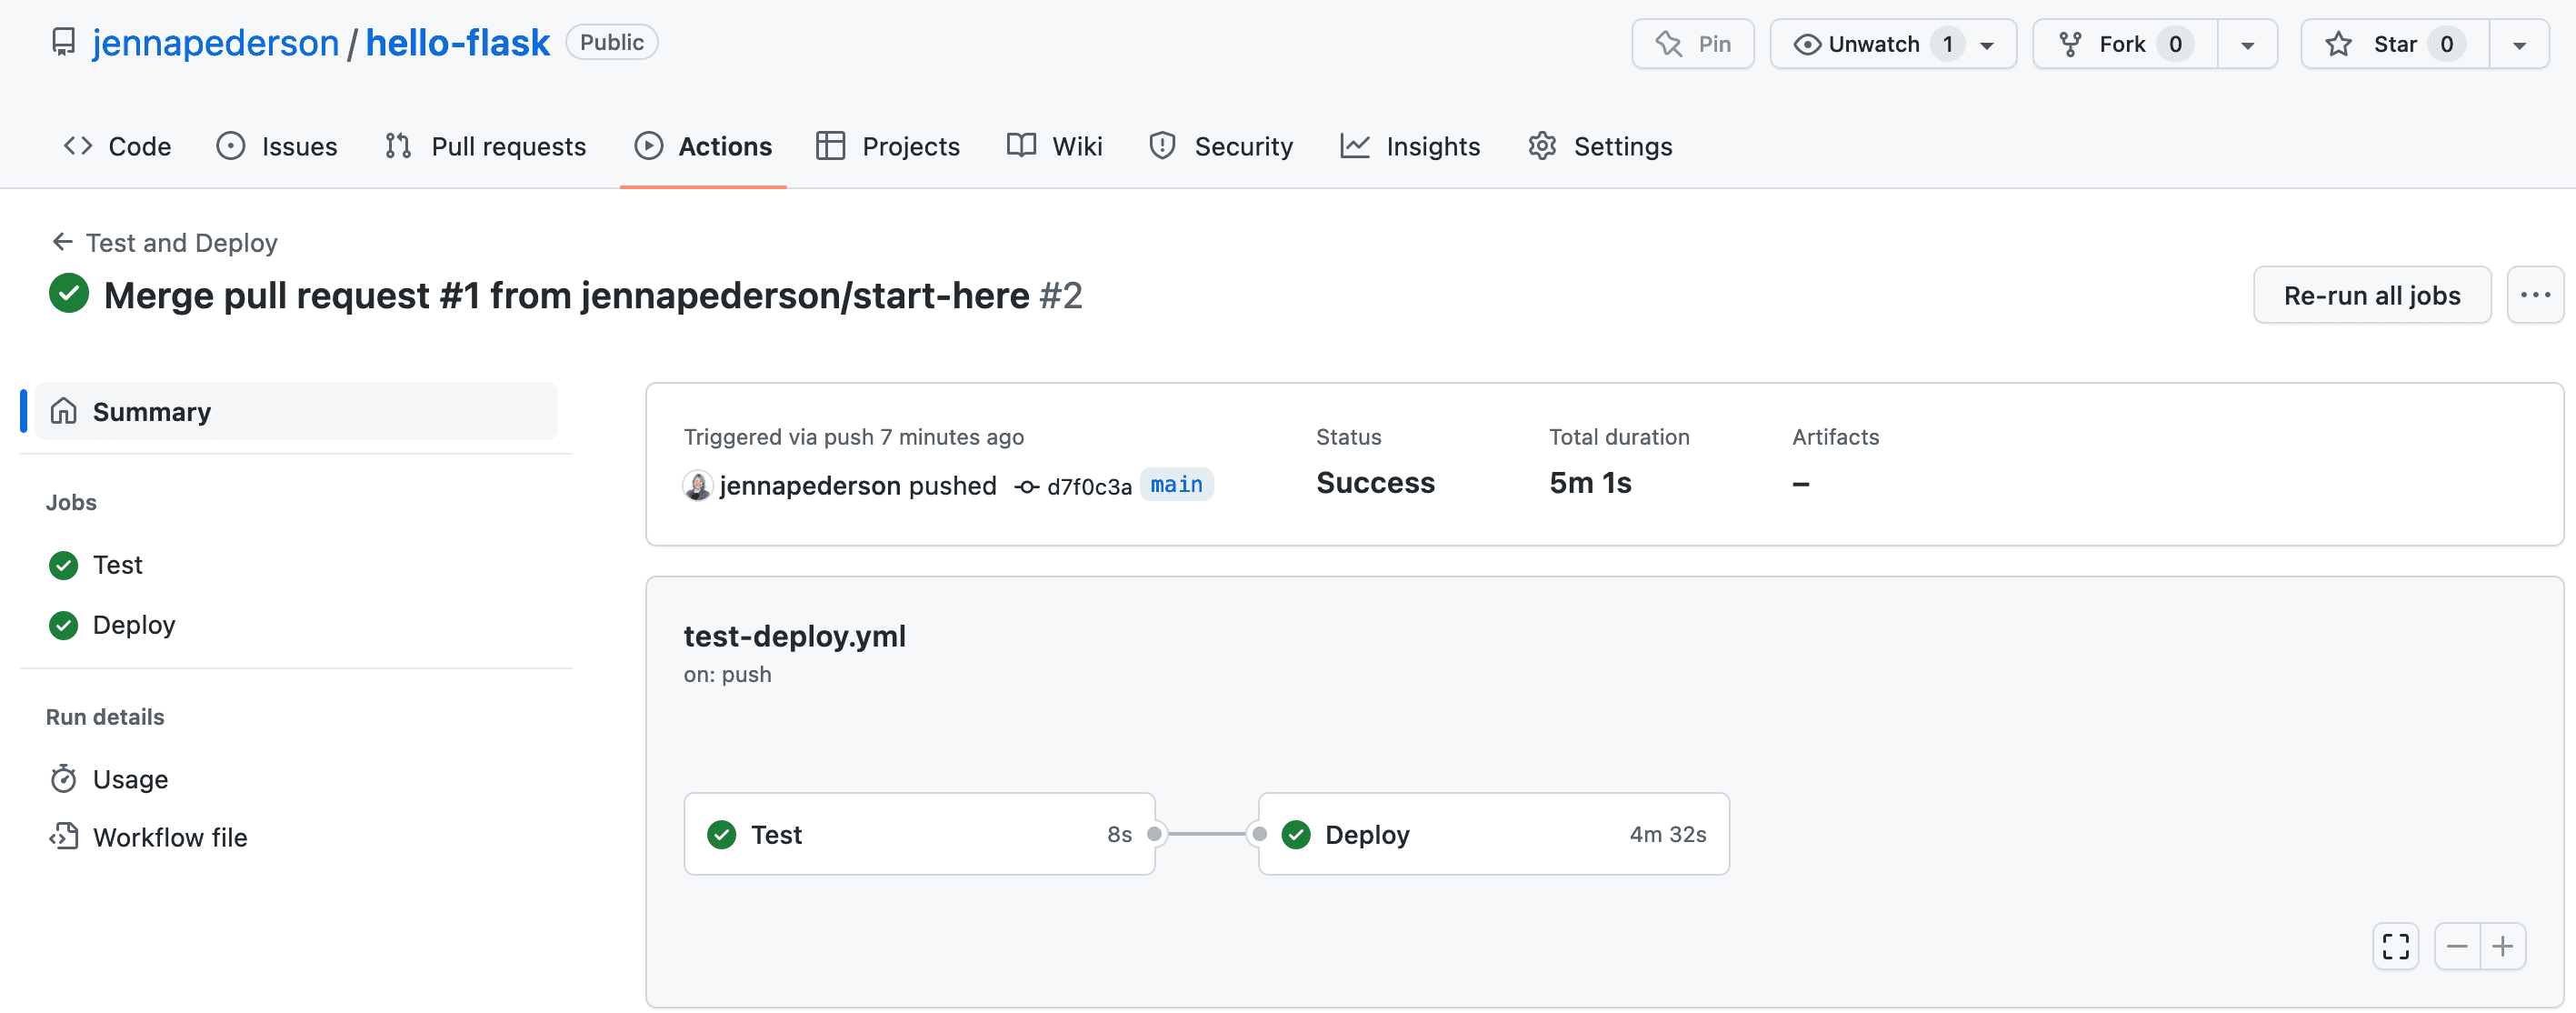 Shows the Actions tab of the hello-flask GitHub repo and the details page of the running workflow, where both the Test and Deploy jobs have completed successfully